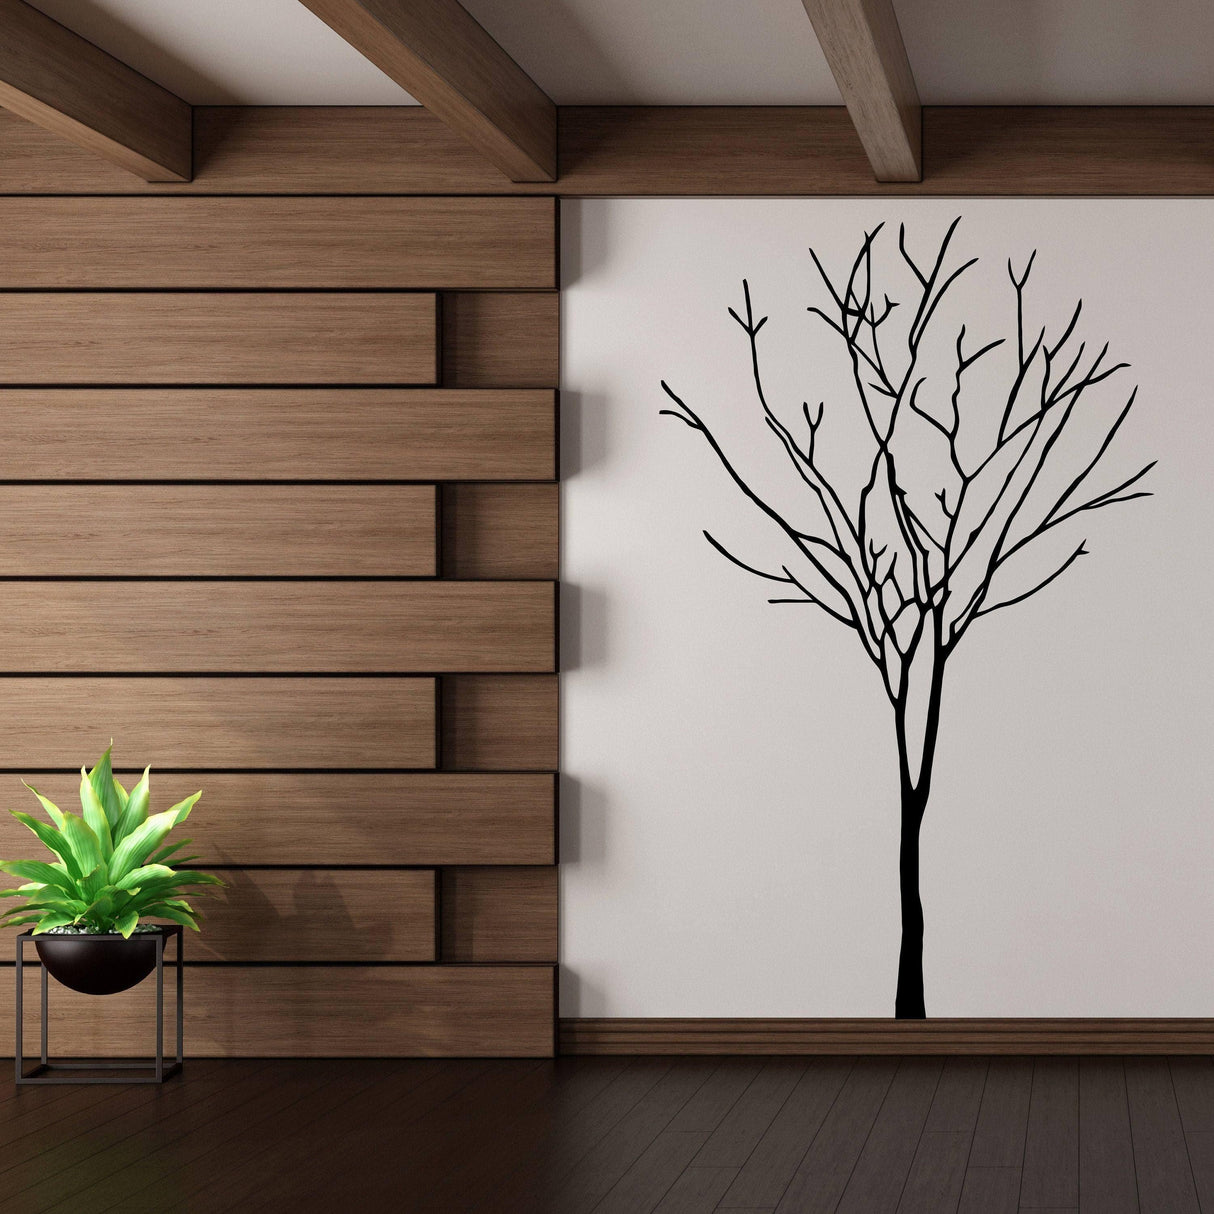 Tree Sticker Decal - Wall Birch Art Vinyl Nursery Stickers - Nature  Botanical Trees Decals - Forest Decor Natural Big Leaf Peel and Stick